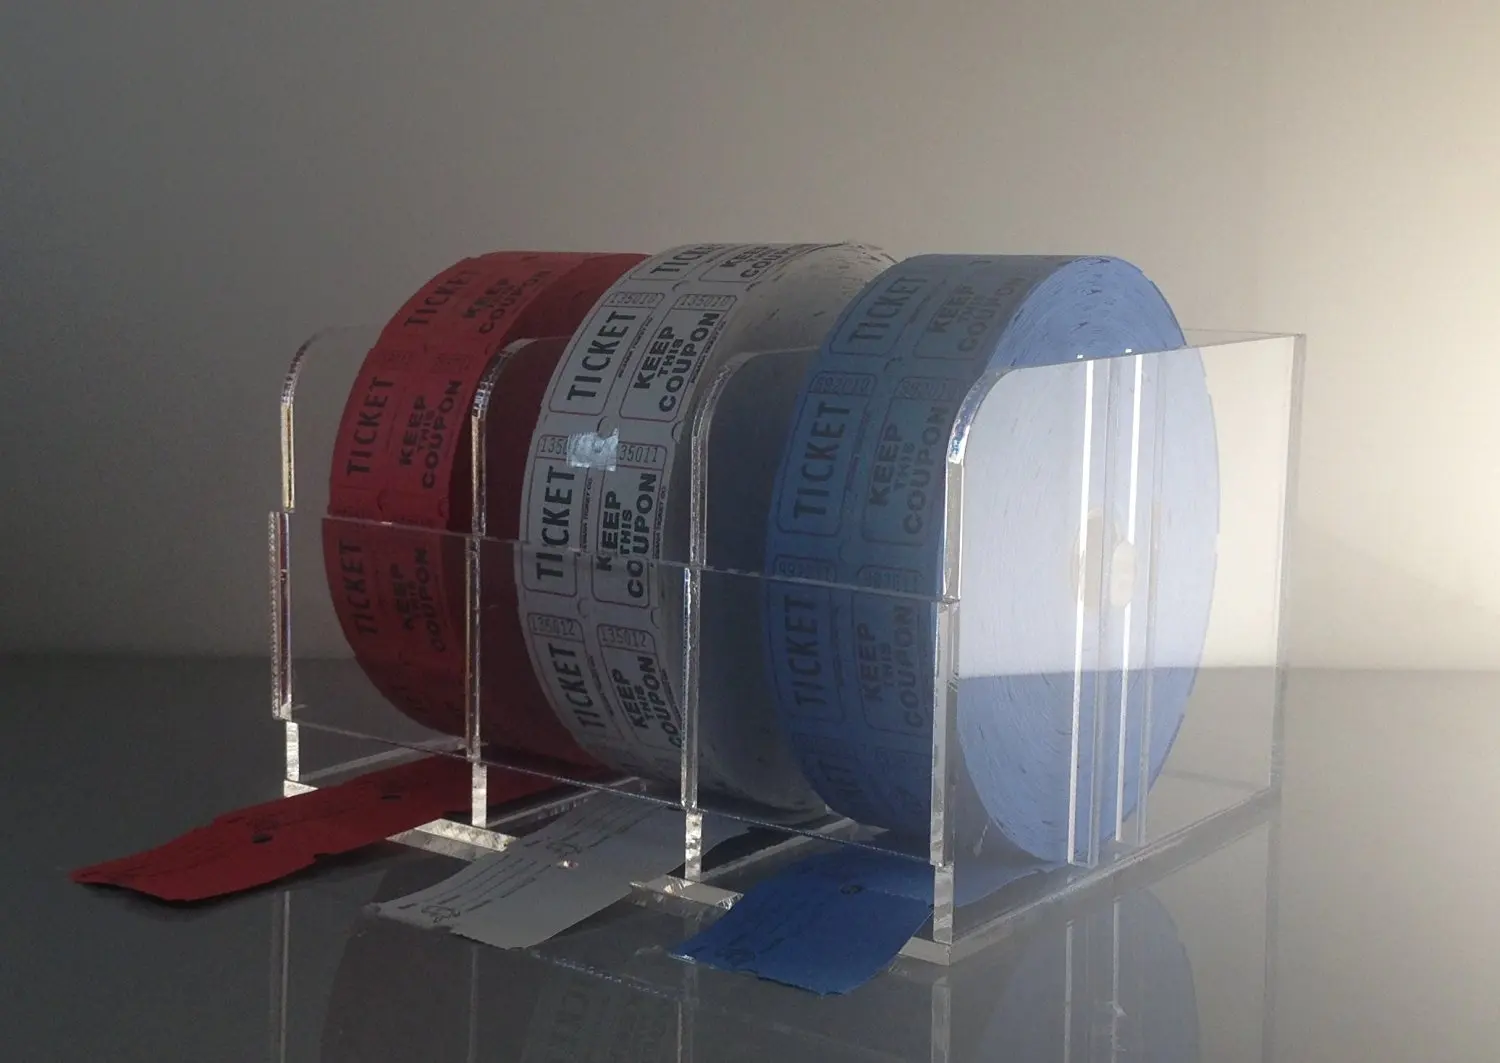 buy-raffle-ticket-holder-dispenser-holds-3-rolls-of-50-50-raffle-tickets-in-cheap-price-on